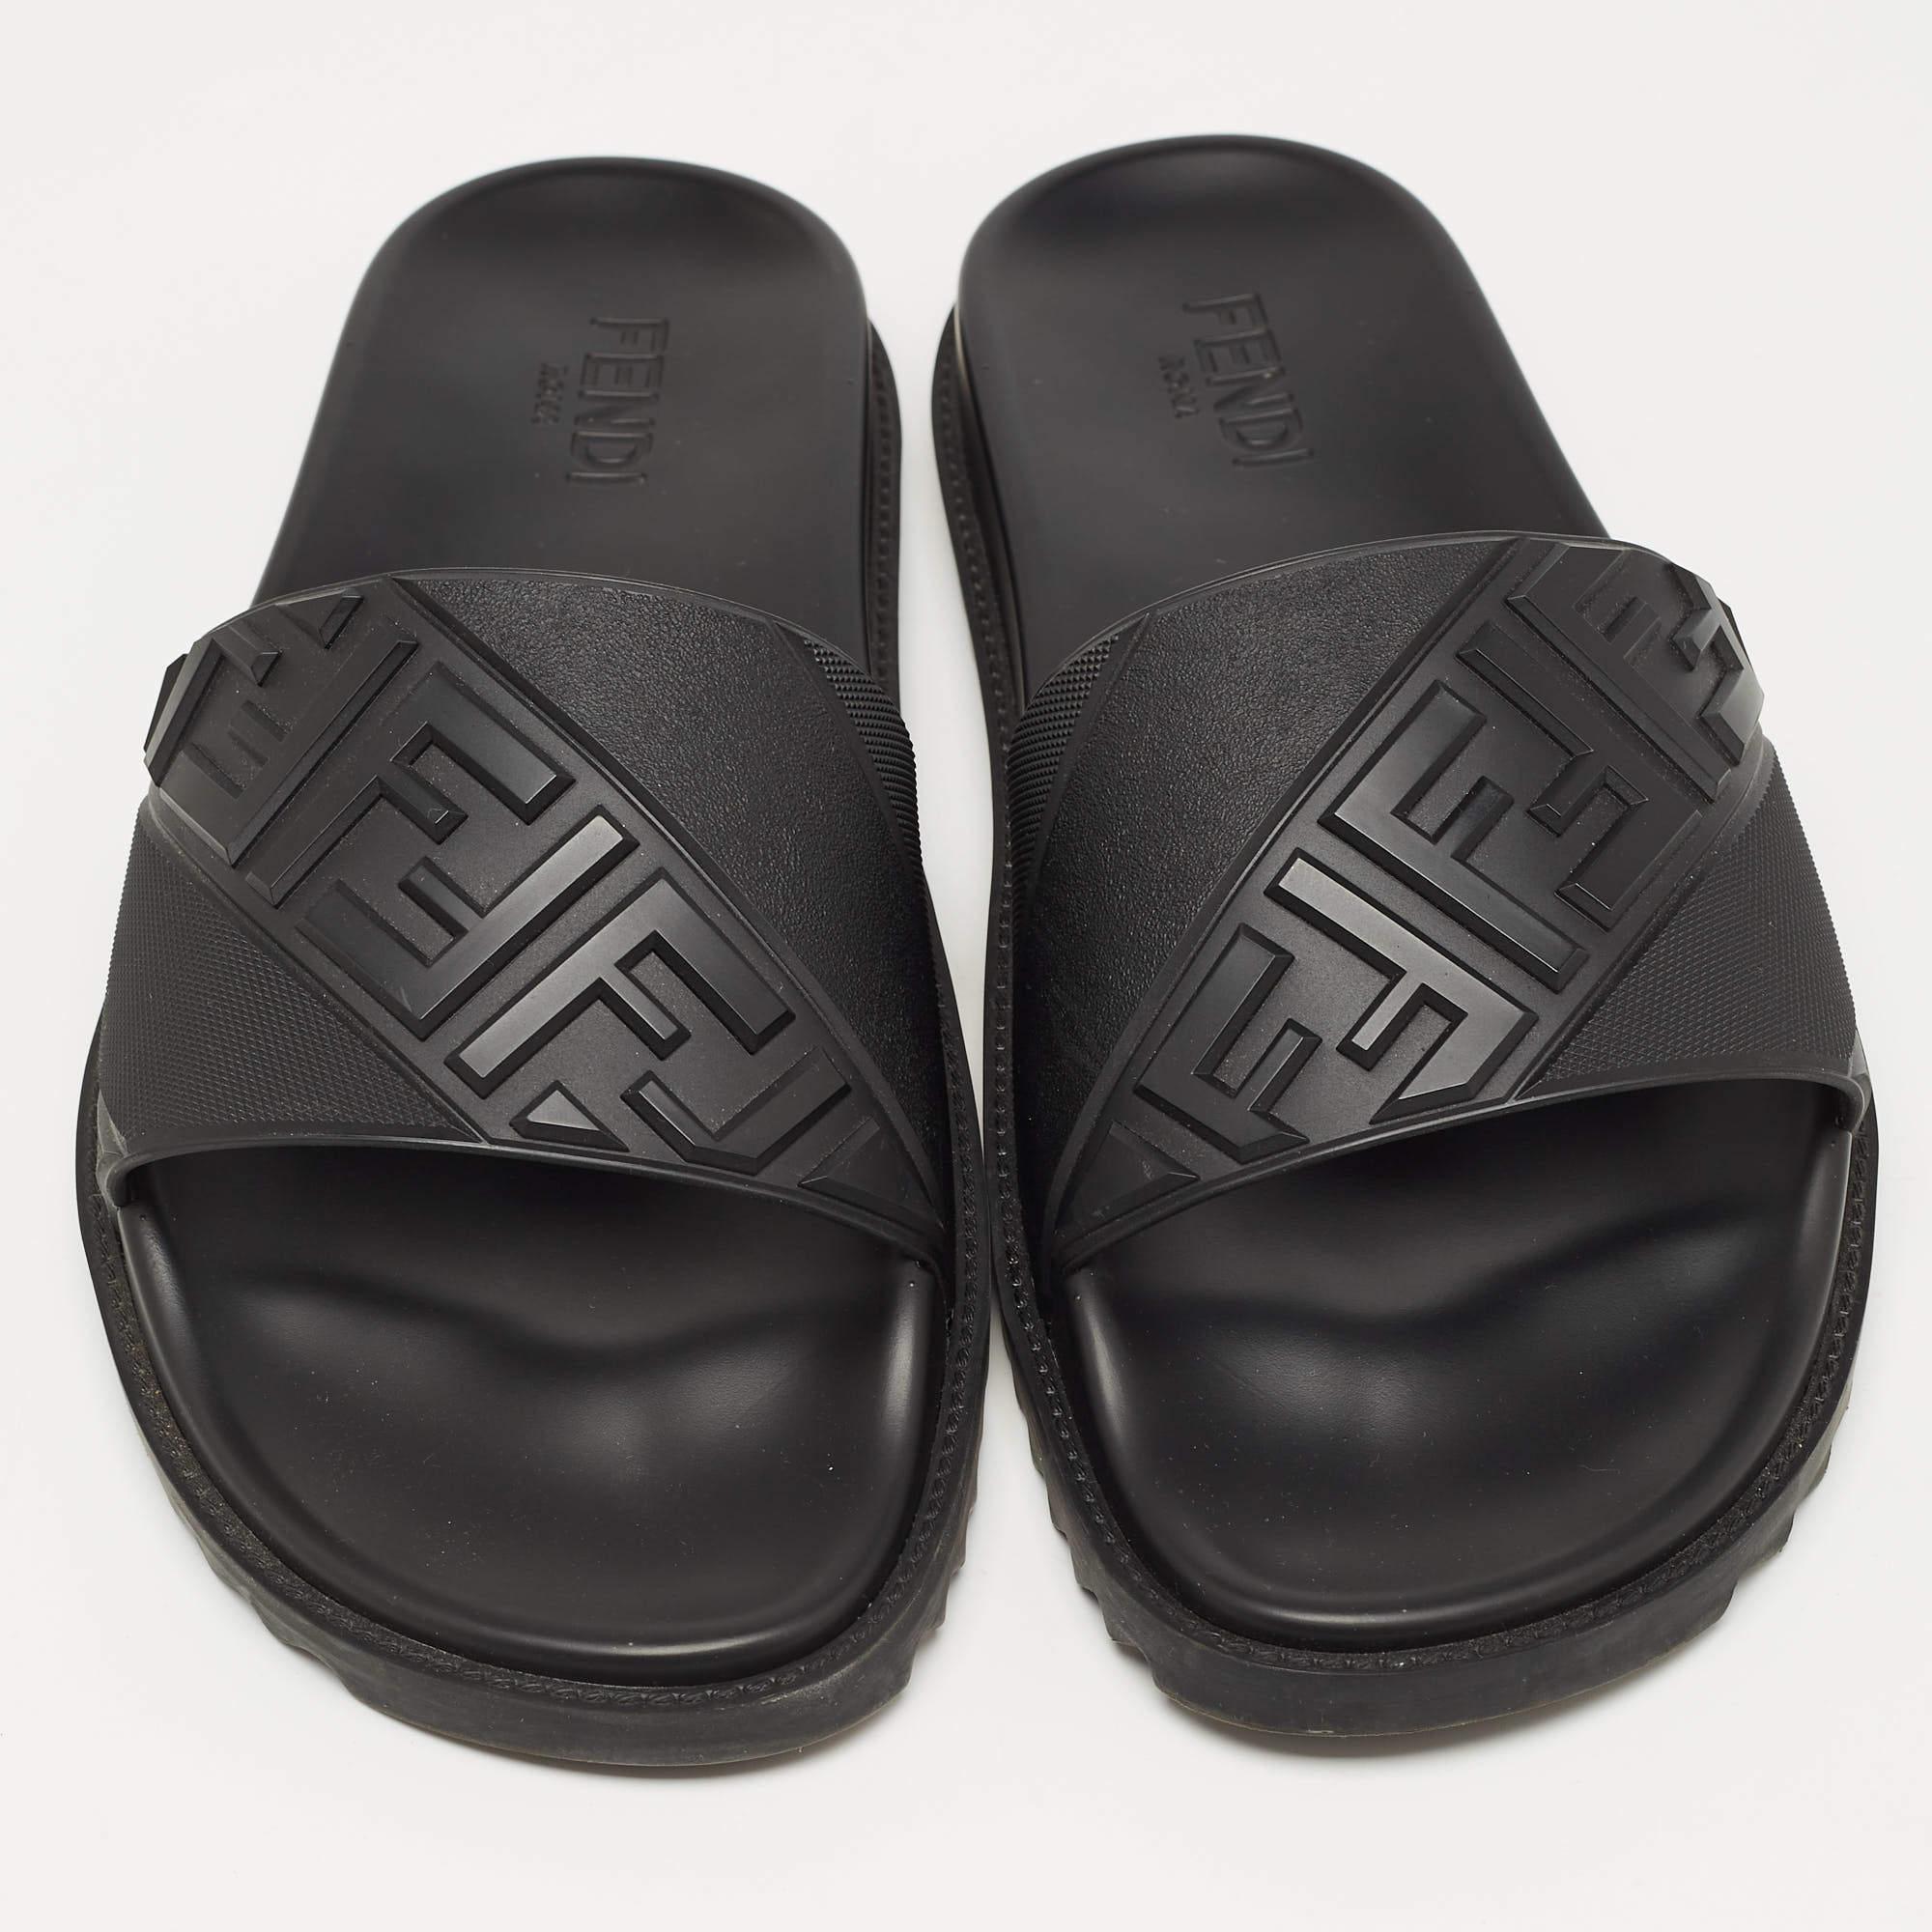 Enhance your casual looks with a touch of high style with these designer slides. Rendered in quality material with a lovely hue adorning its expanse, this pair is a must-have!

Includes: Original Dustbag, Original Box